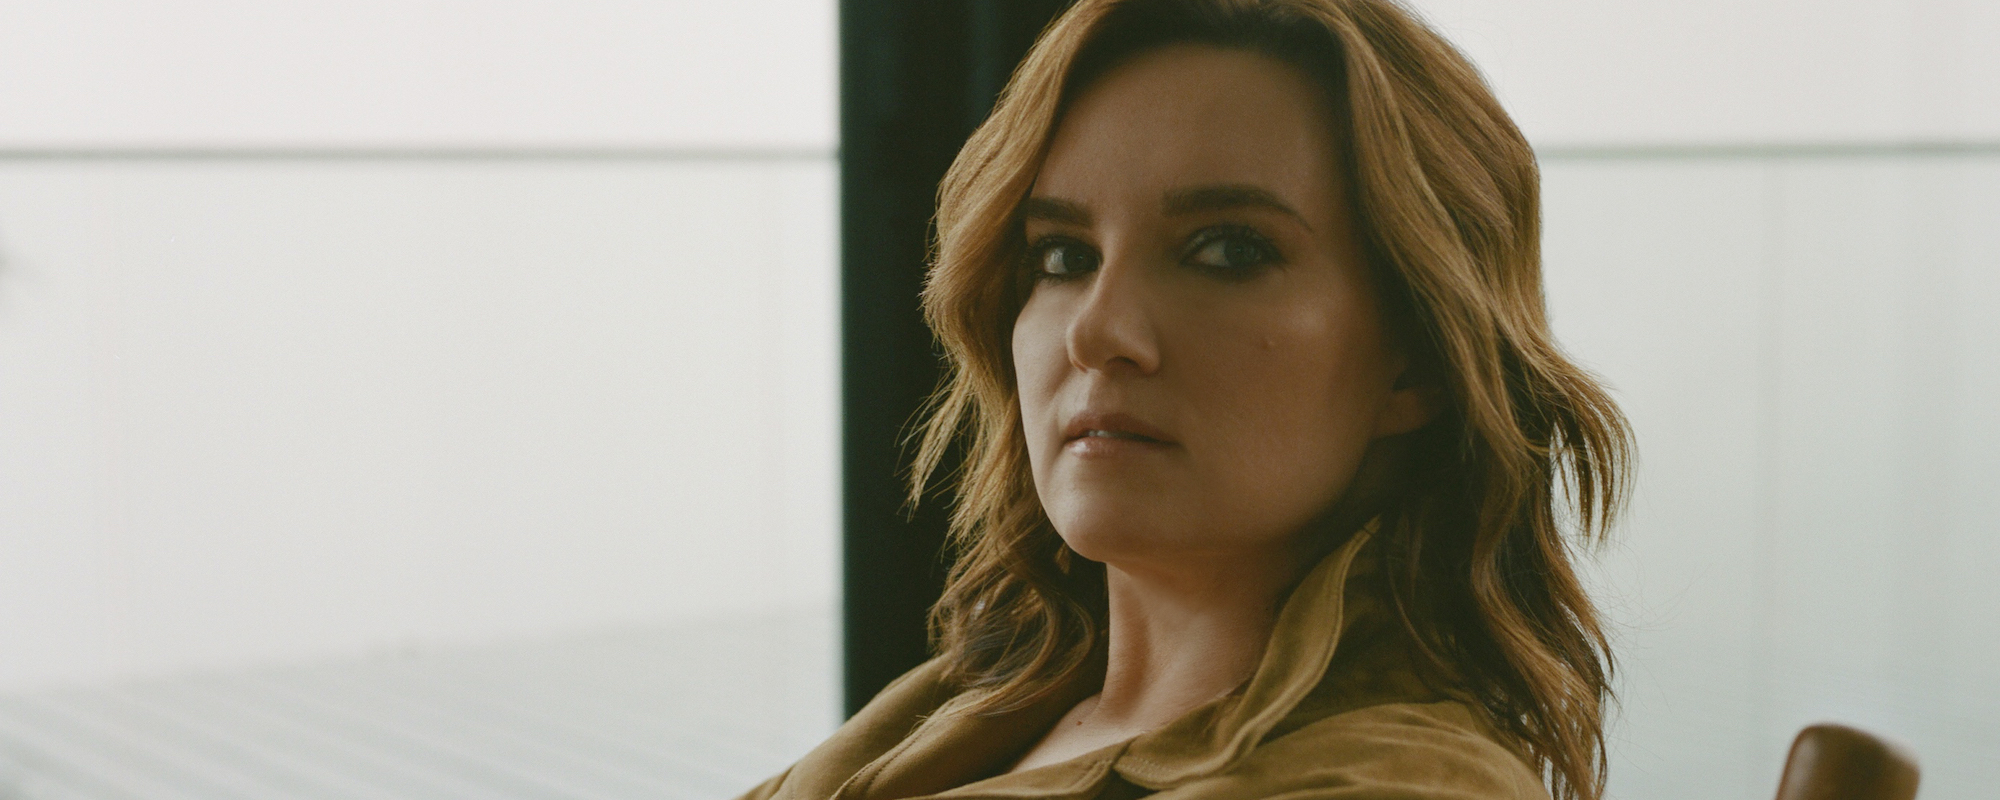 Brandy Clark Faces Self-Doubt In New Video for Brandi Carlile Collaboration “Dear Insecurity”